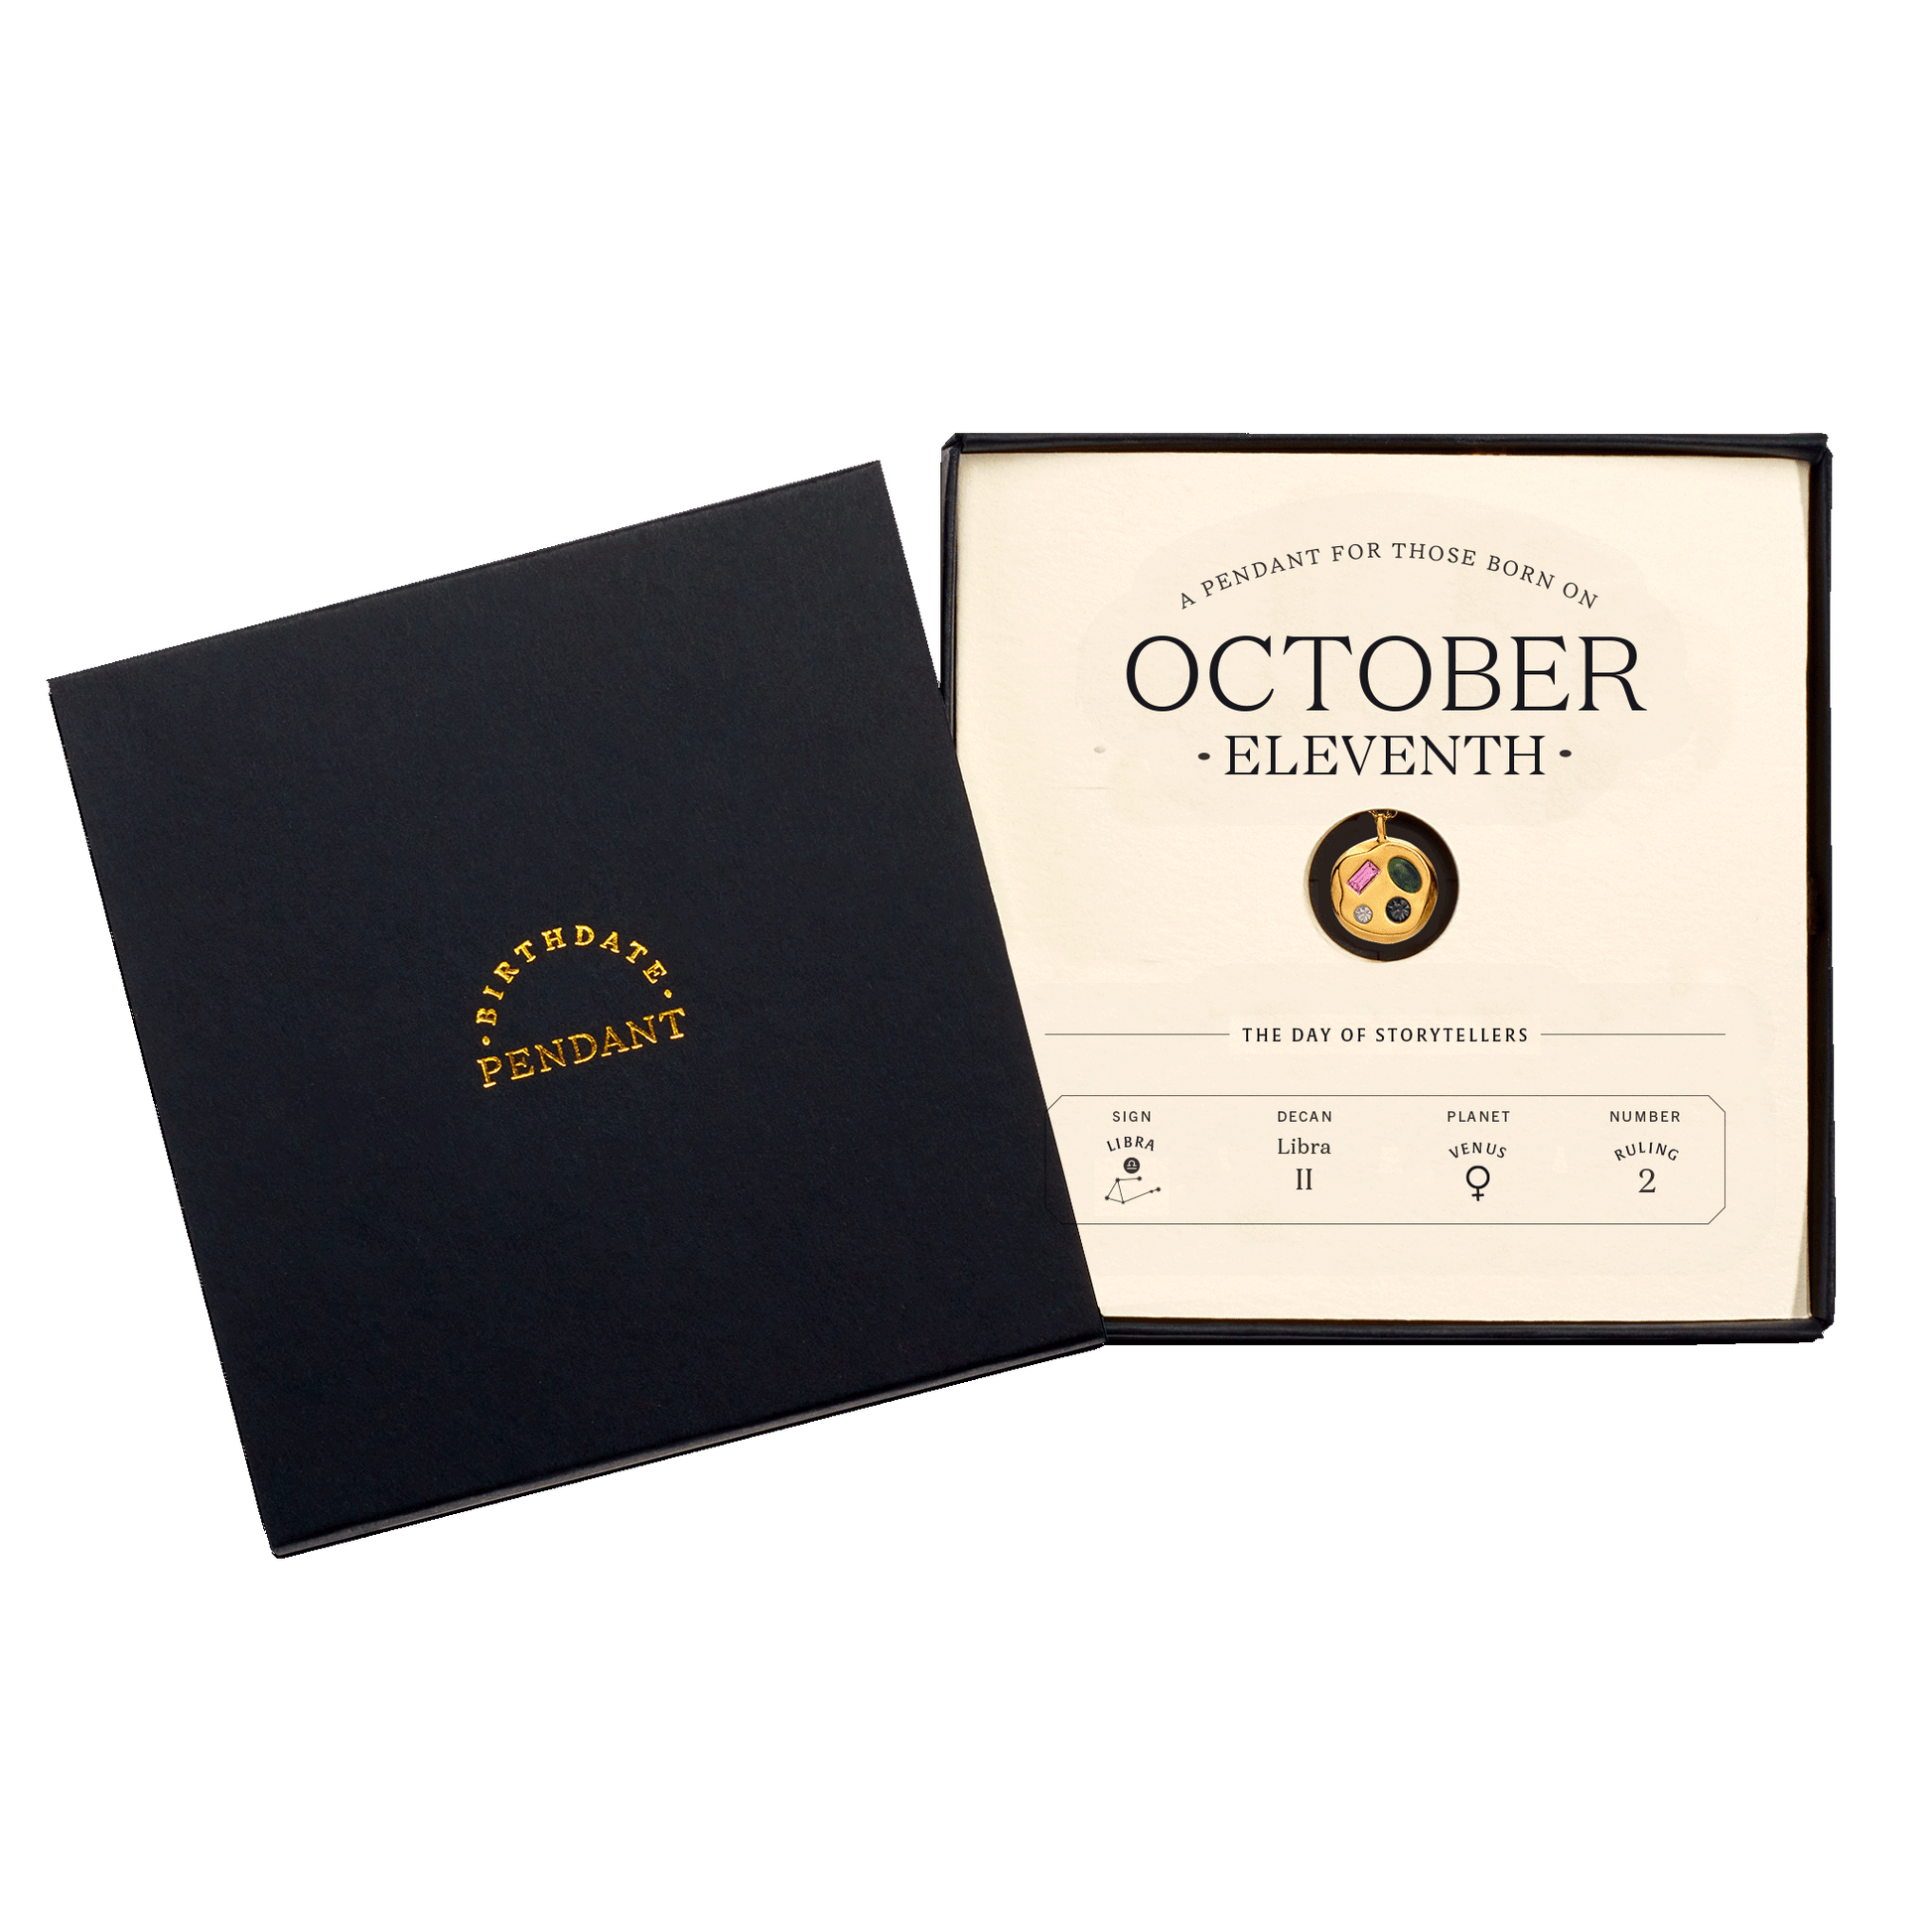 The October Eleventh Pendant inside its box